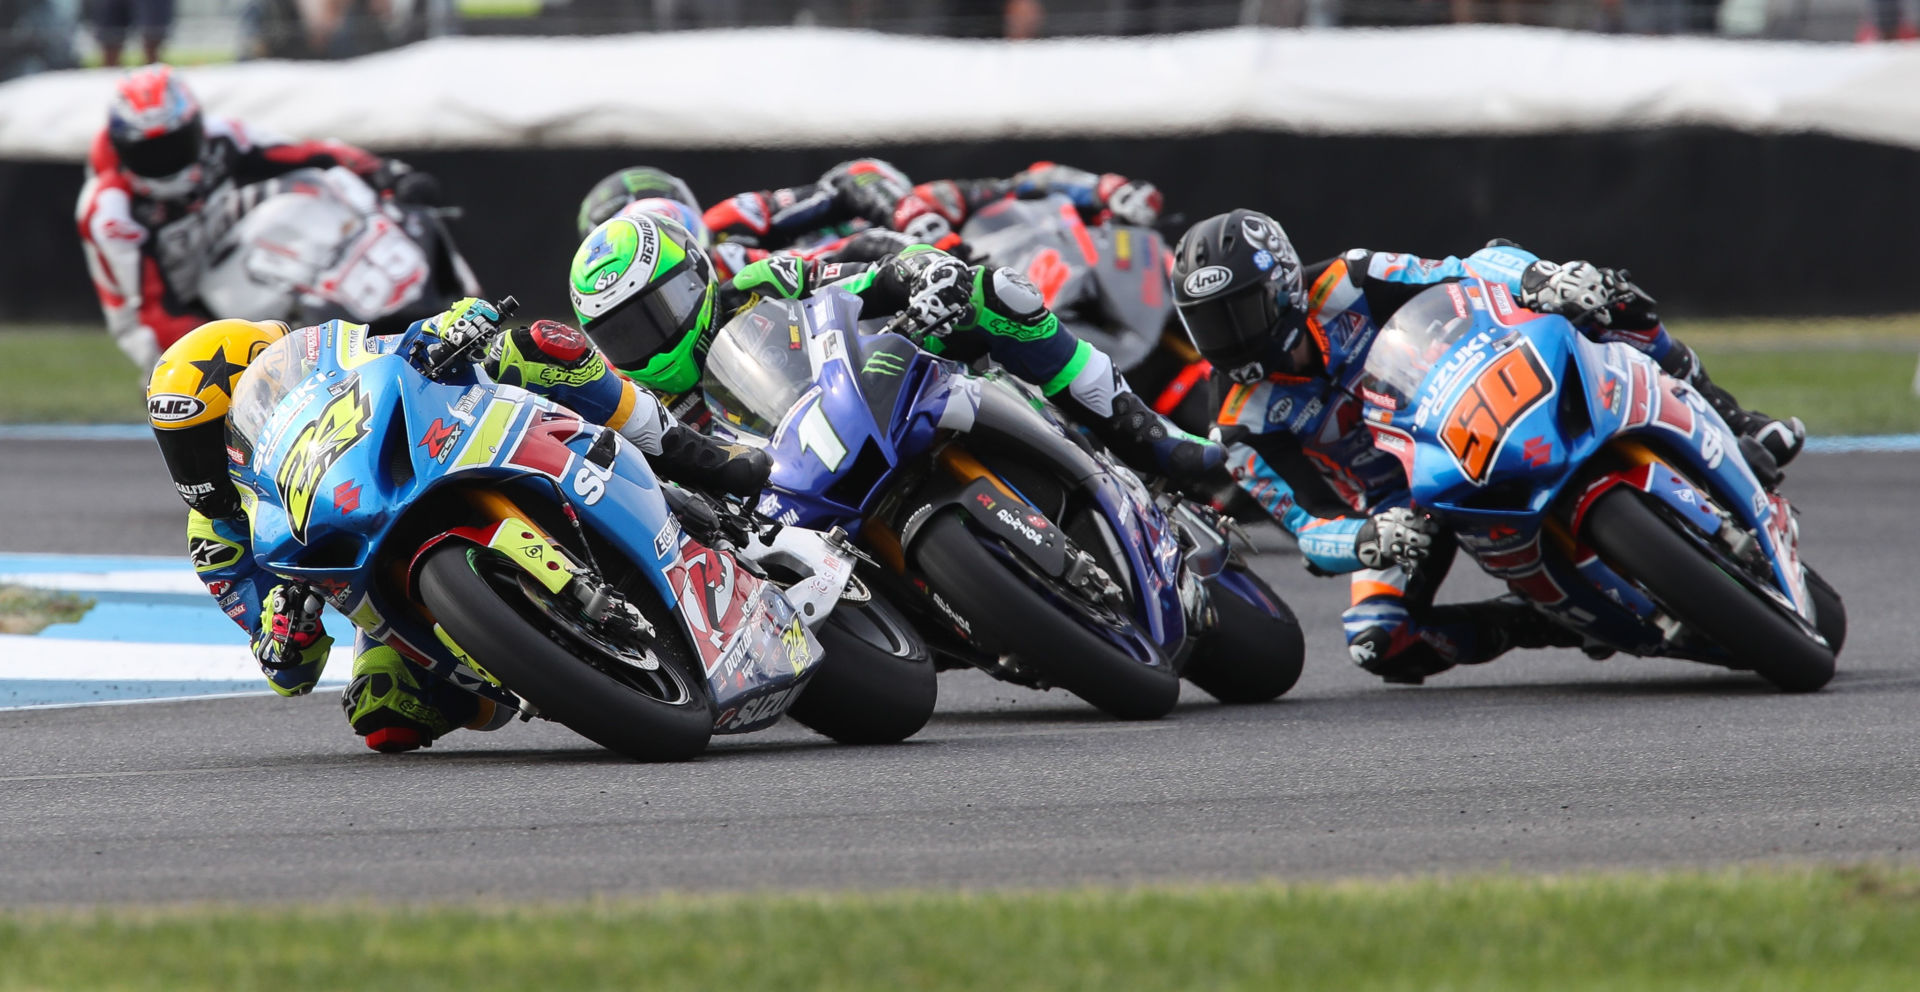 Toni Elias (24), Cameron Beaubier (1), and Bobby Fong (50) lead the start of MotoAmerica Superbike Race One at Indianapolis Motor Speedway. Photo by Brian J. Nelson.